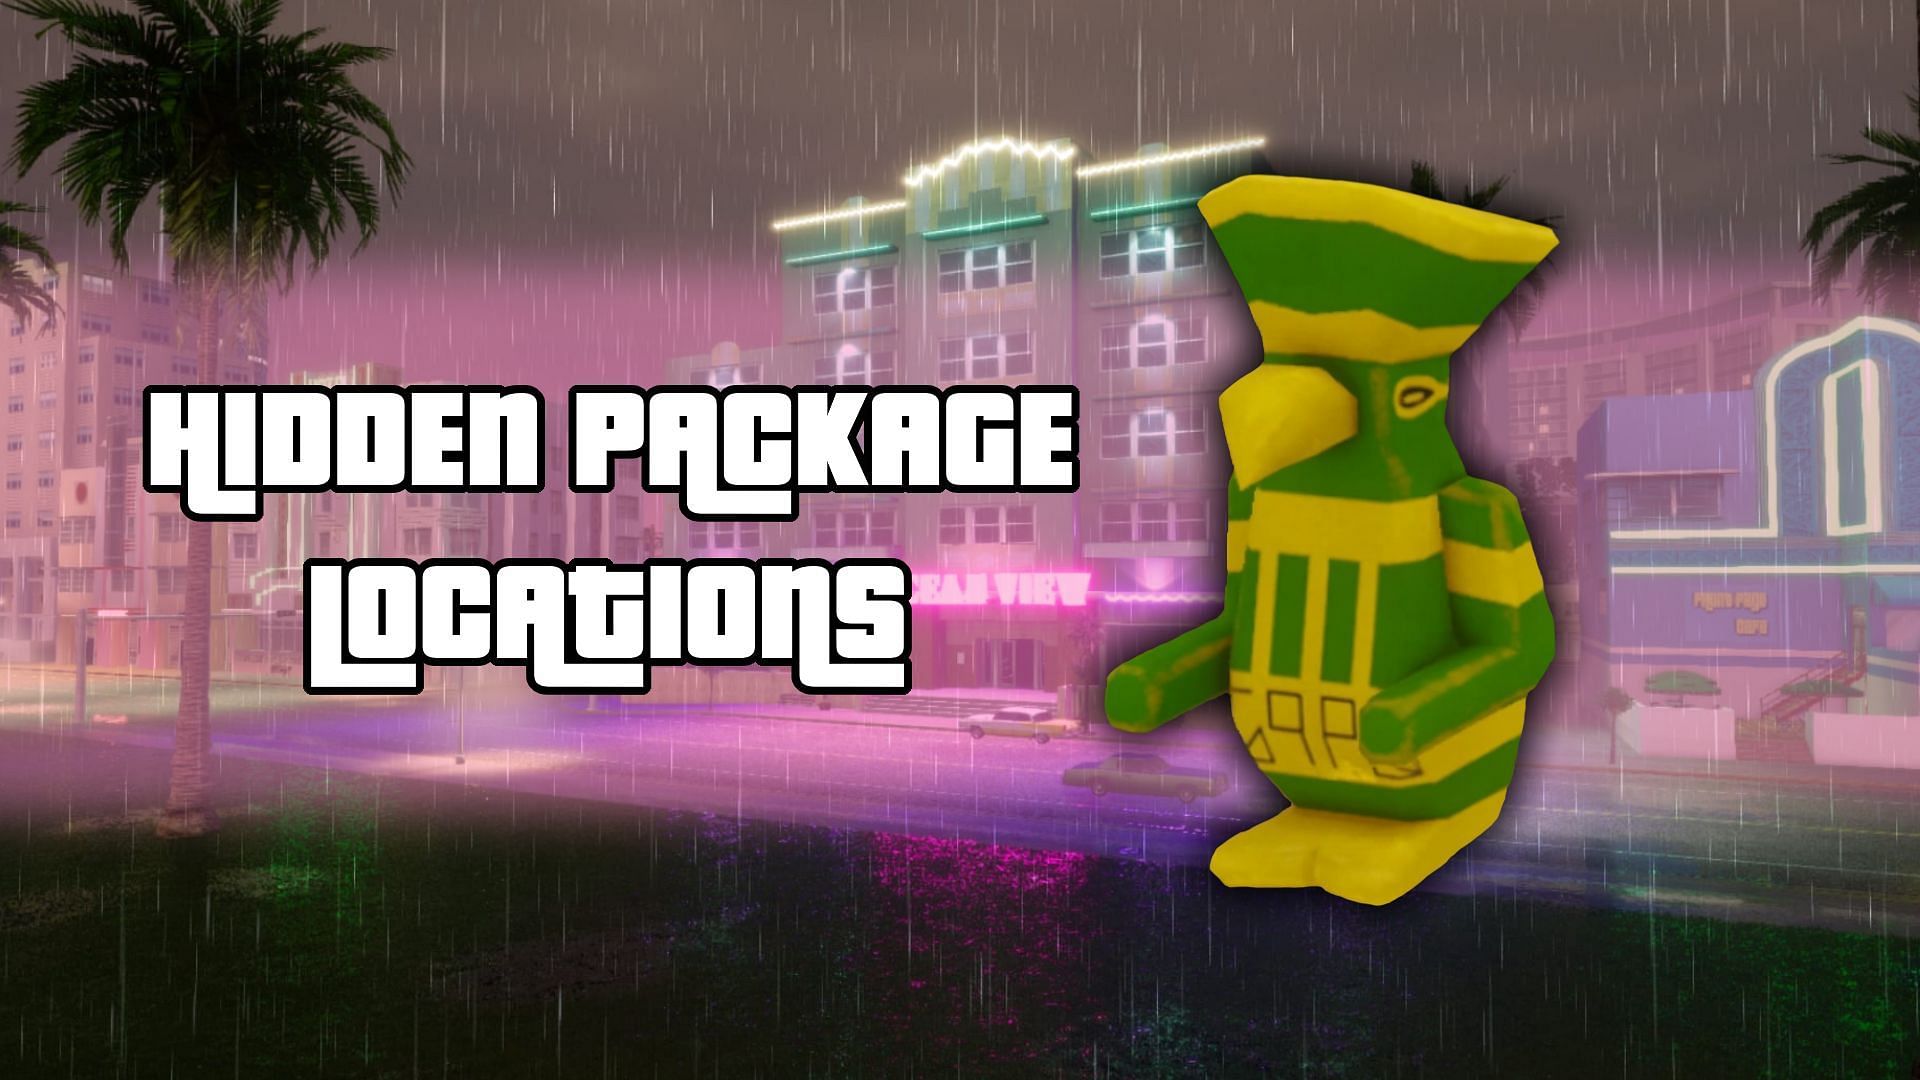 vice city 100 packages